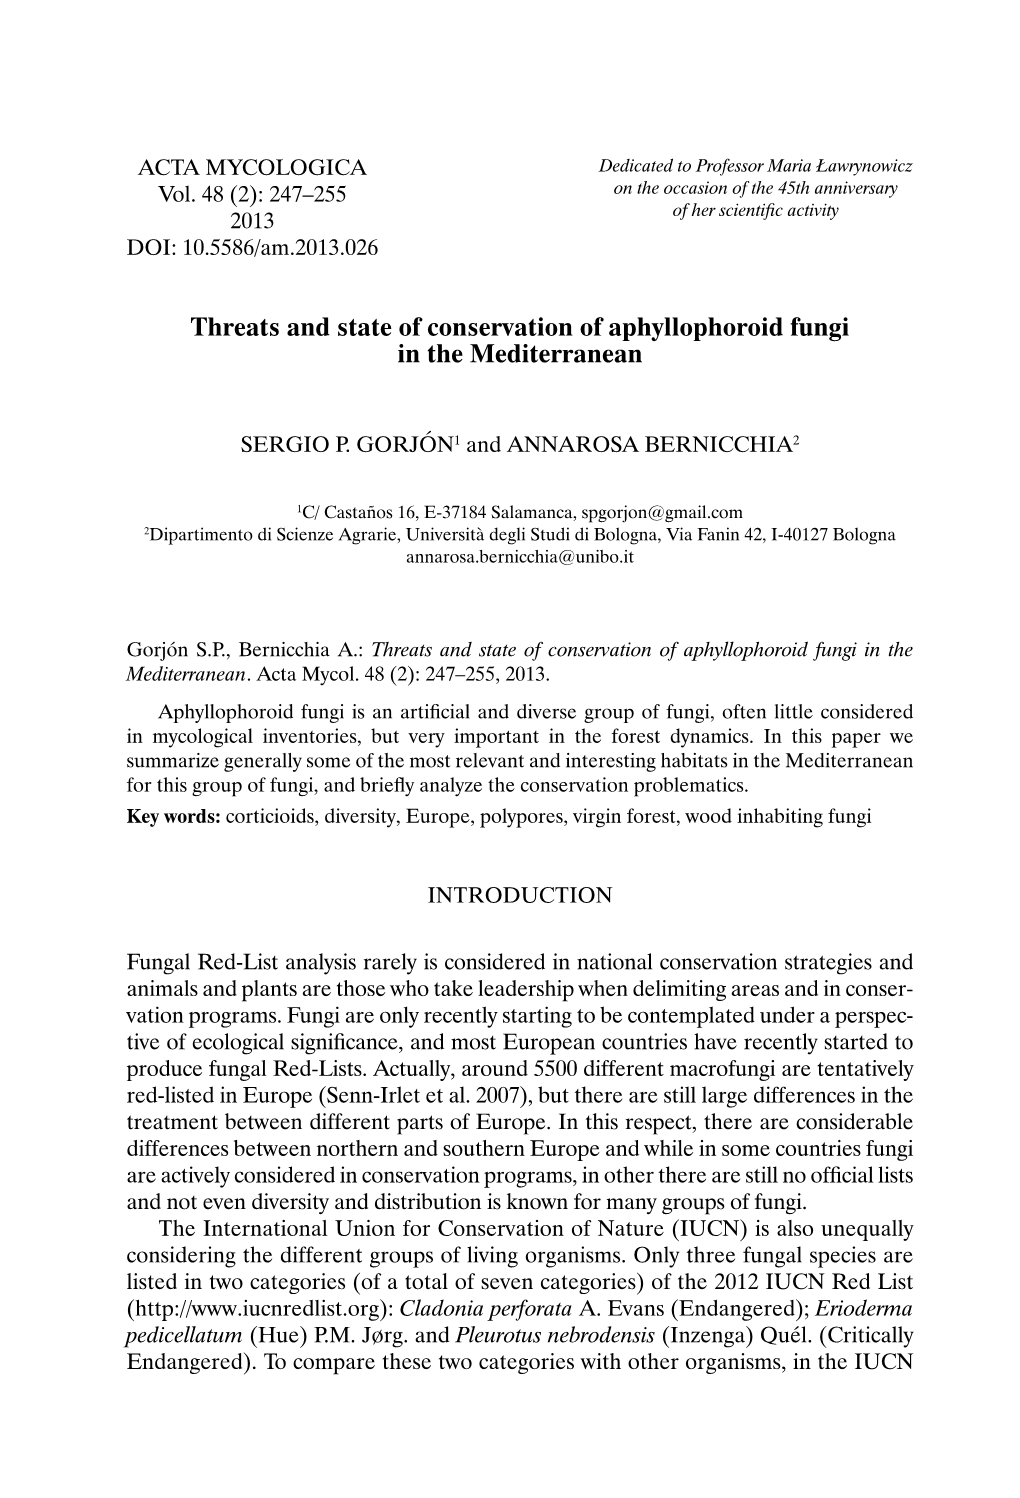 Threats and State of Conservation of Aphyllophoroid Fungi in the Mediterranean